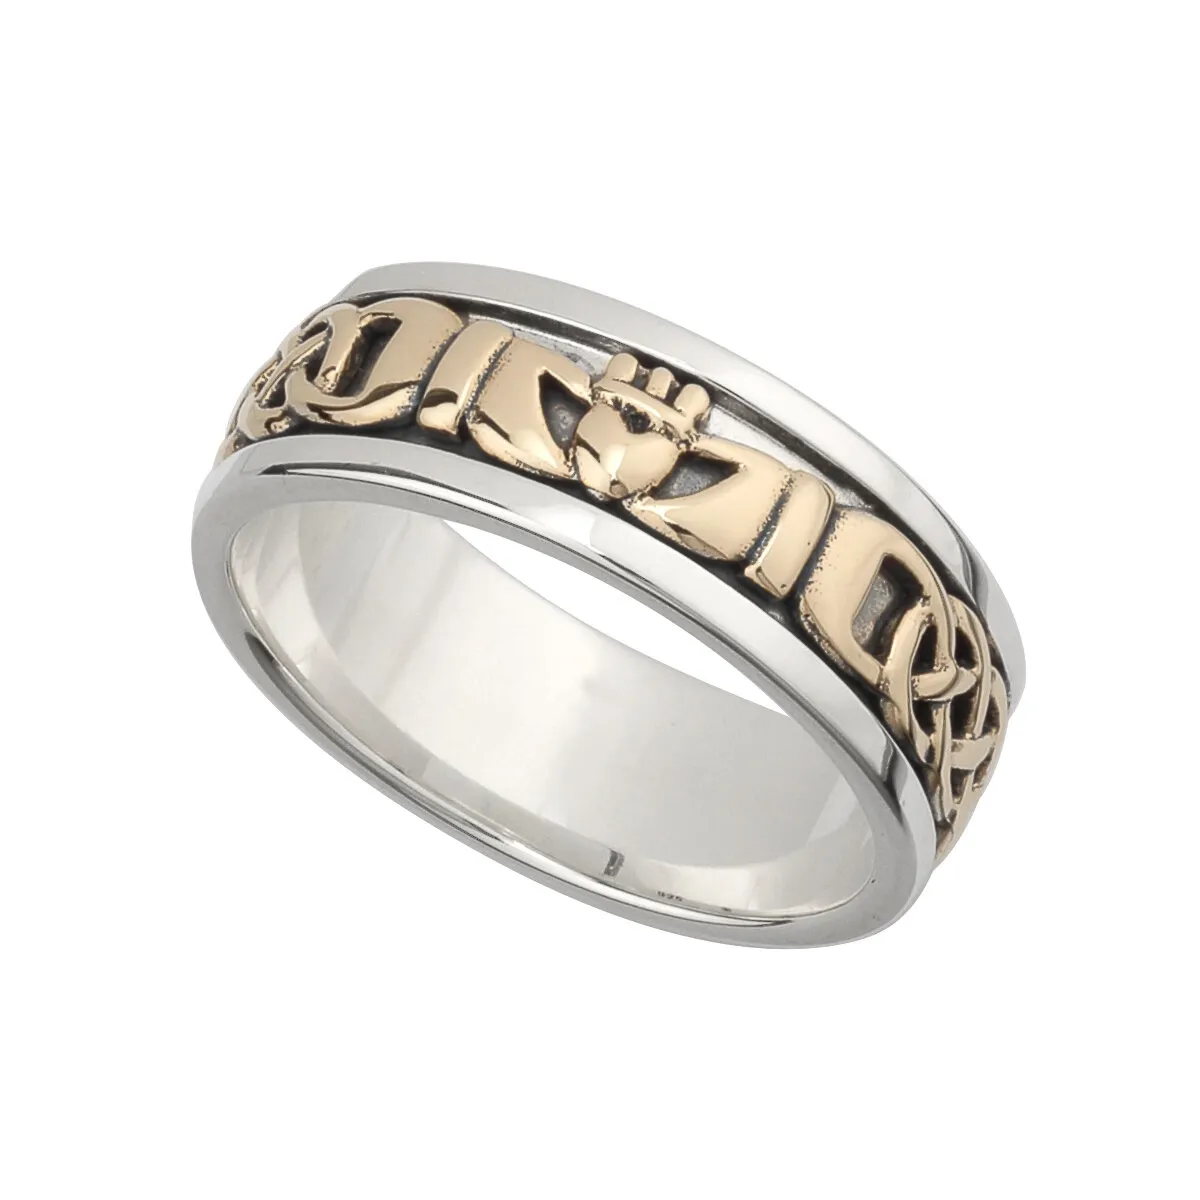 Mens Gold And Silver Claddagh Celtic Ring...